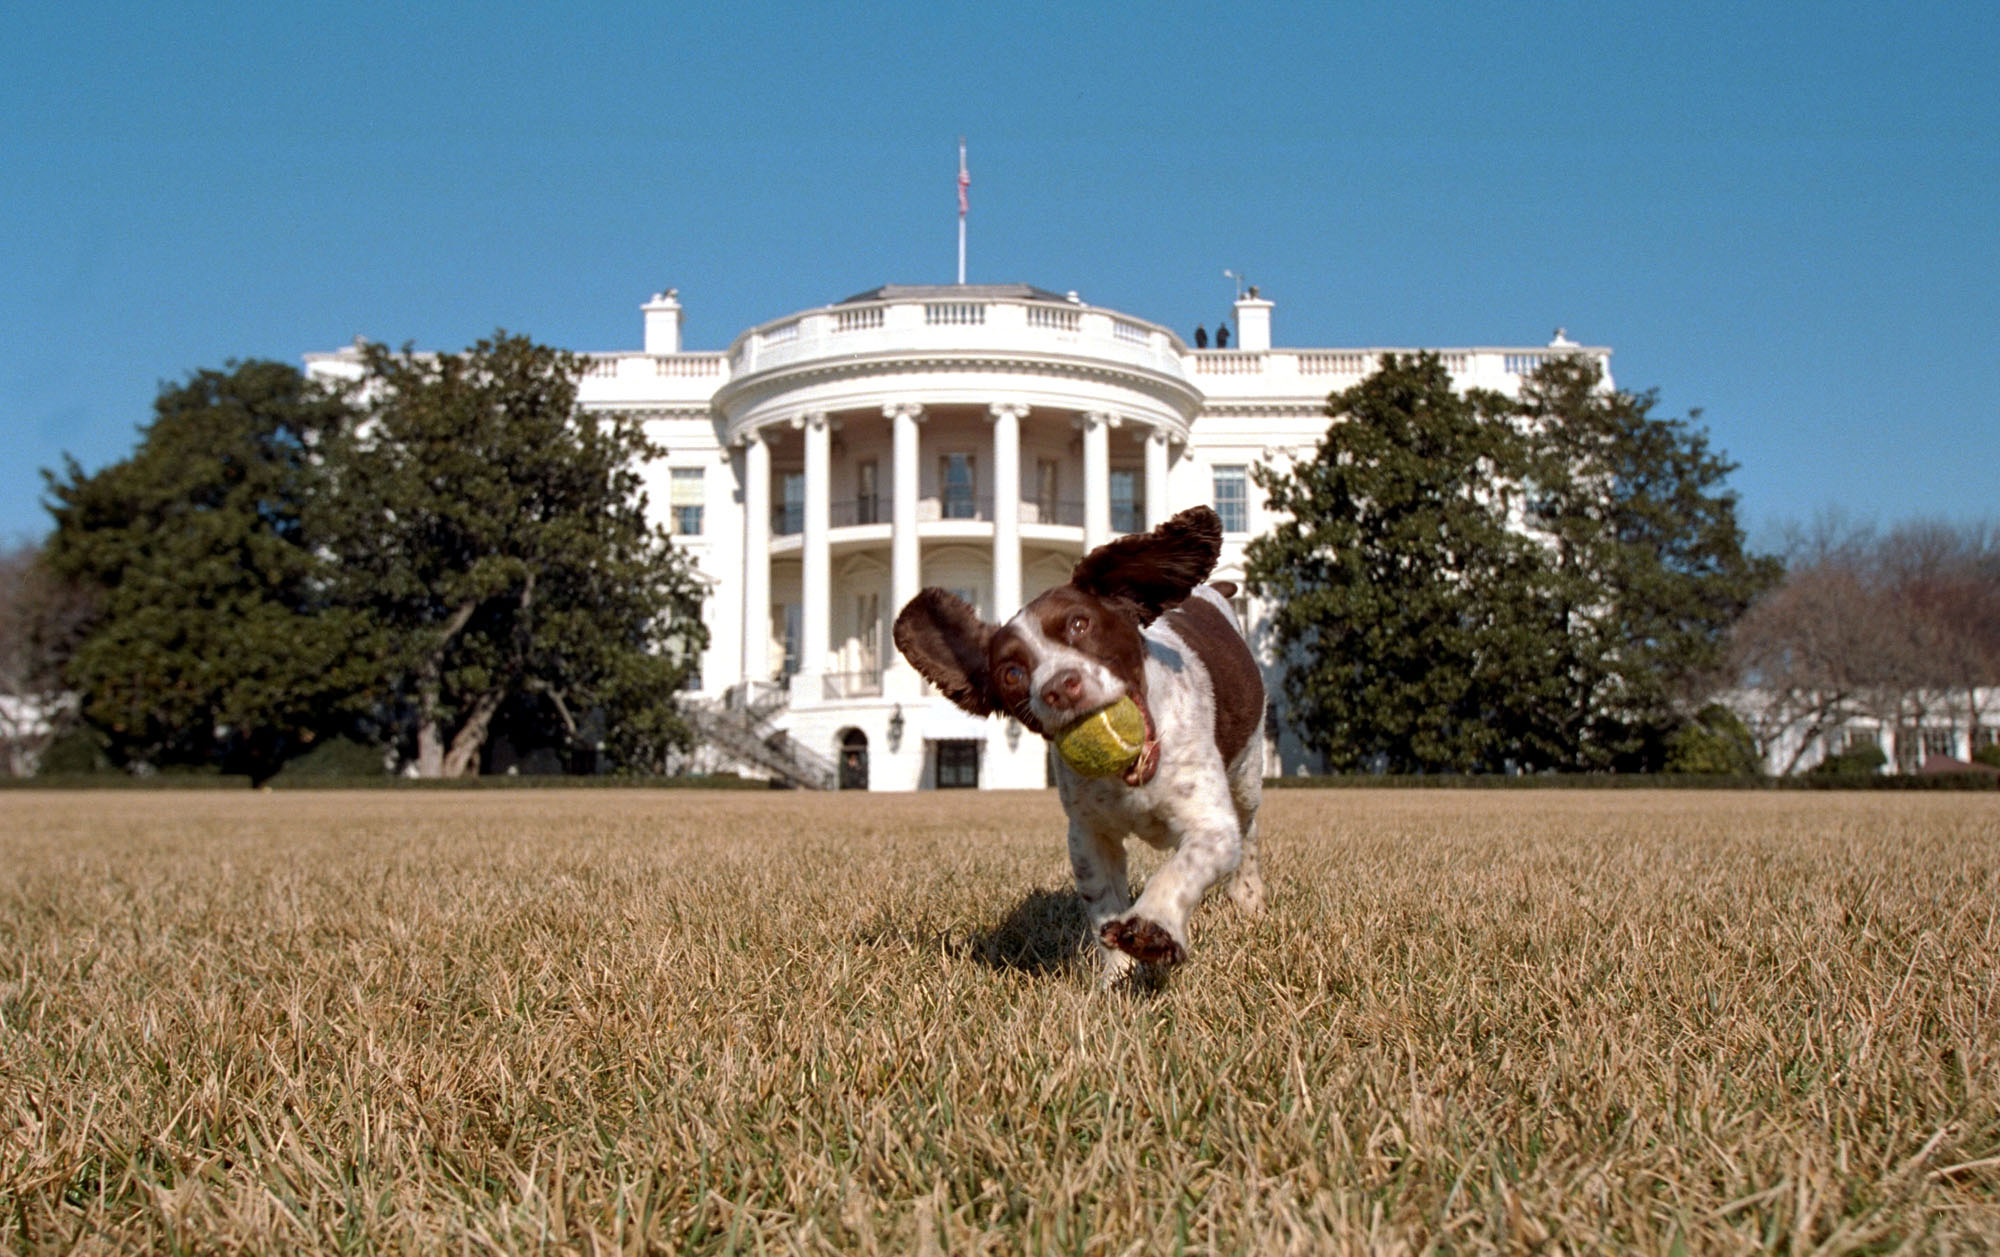 George W. Bush's dog, Spot, an English Springer Spaniel, plays on the south lawn of the White House on Jan. 23, 2001. Spot is the offspring of Millie, who was former President George Bush's family dog.